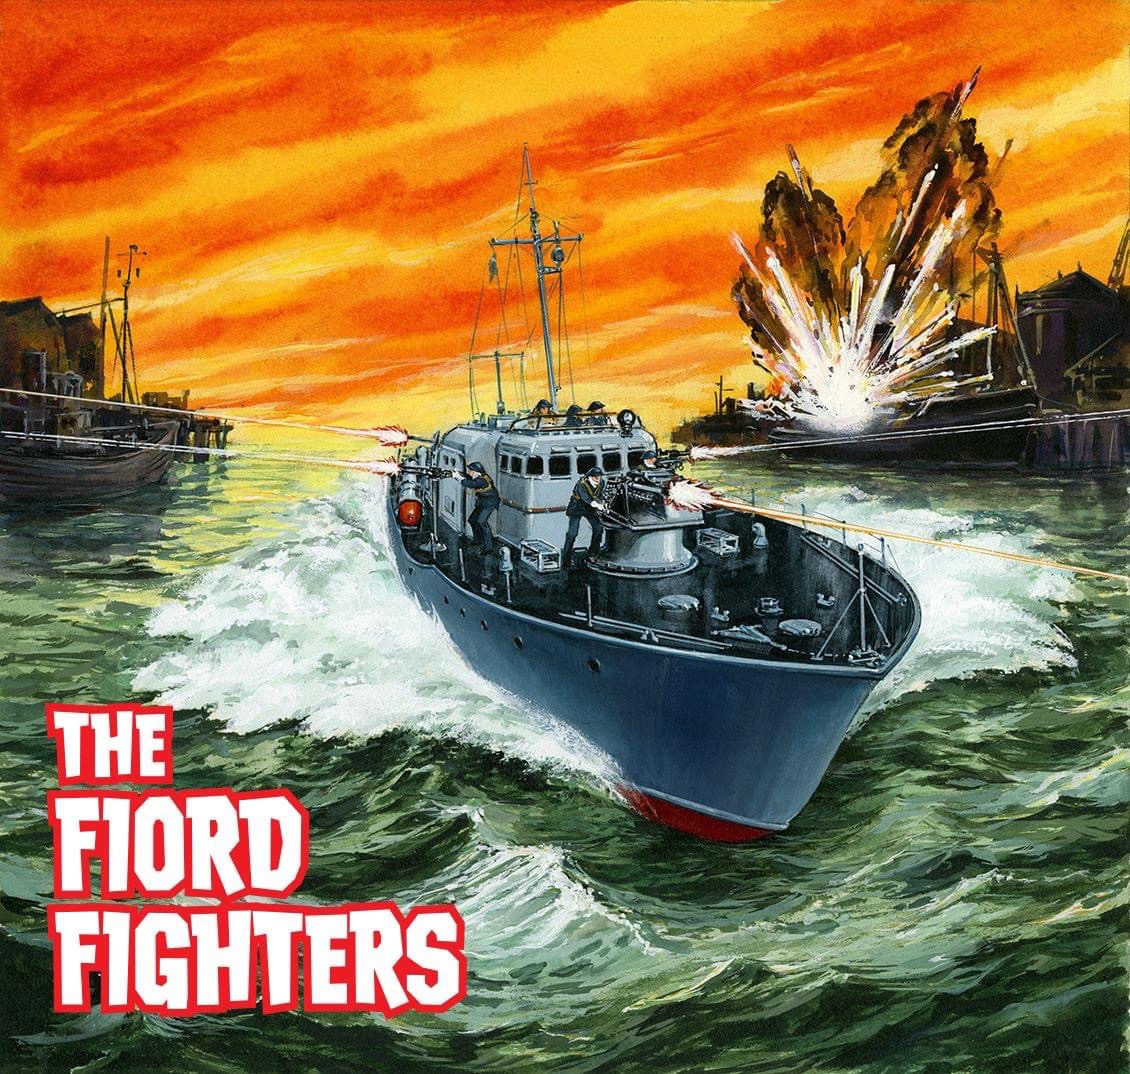 Commando 5434 Silver Collection: The Fiord Fighters Full